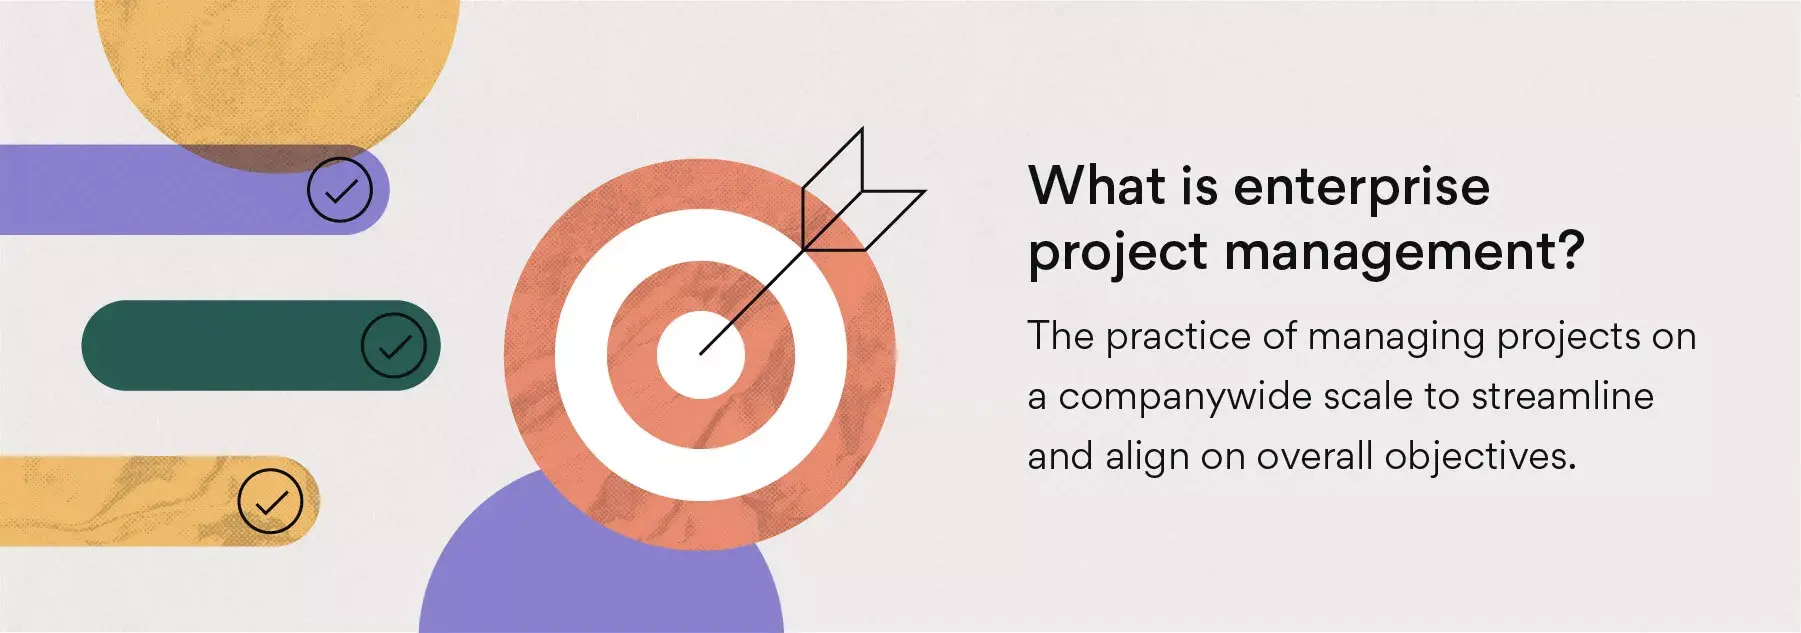 [inline illustration] What is enterprise project management? (infographic)